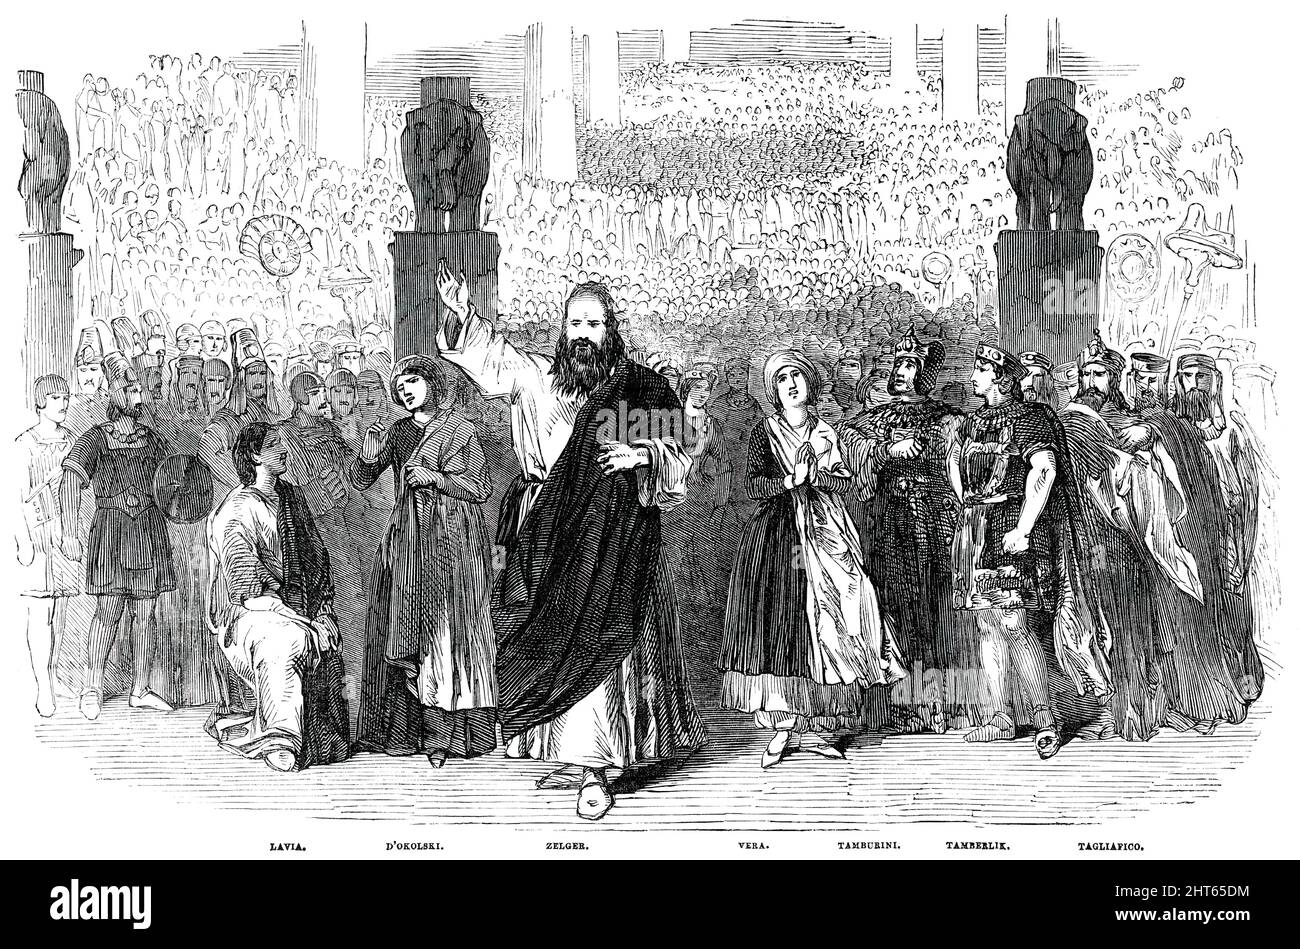 Scene form &quot;Zora&quot;, at the Royal Italian Opera, 1850. London stage production: Lavia, d'Okolski, Zelger, Vera, Tamburini, Tamberlik, Tagliafico. 'The most complete success attended &quot;Zora&quot;, which was thus cast: Merismane and Sinaide (the King and Queen of Egypt), Tamburini and Mdlle. Vera; Amenophi (their son), Tamberlik; Osiris (Grand Priest of Isis), Tagliafico; and Aufide (Captain of the Guards), Soldi...The new tenor, Tamberlik, has achieved the most signal triumph...Mdme. Castellan was never heard and seen to better advantage. The new basso sings impressively...and the r Stock Photo